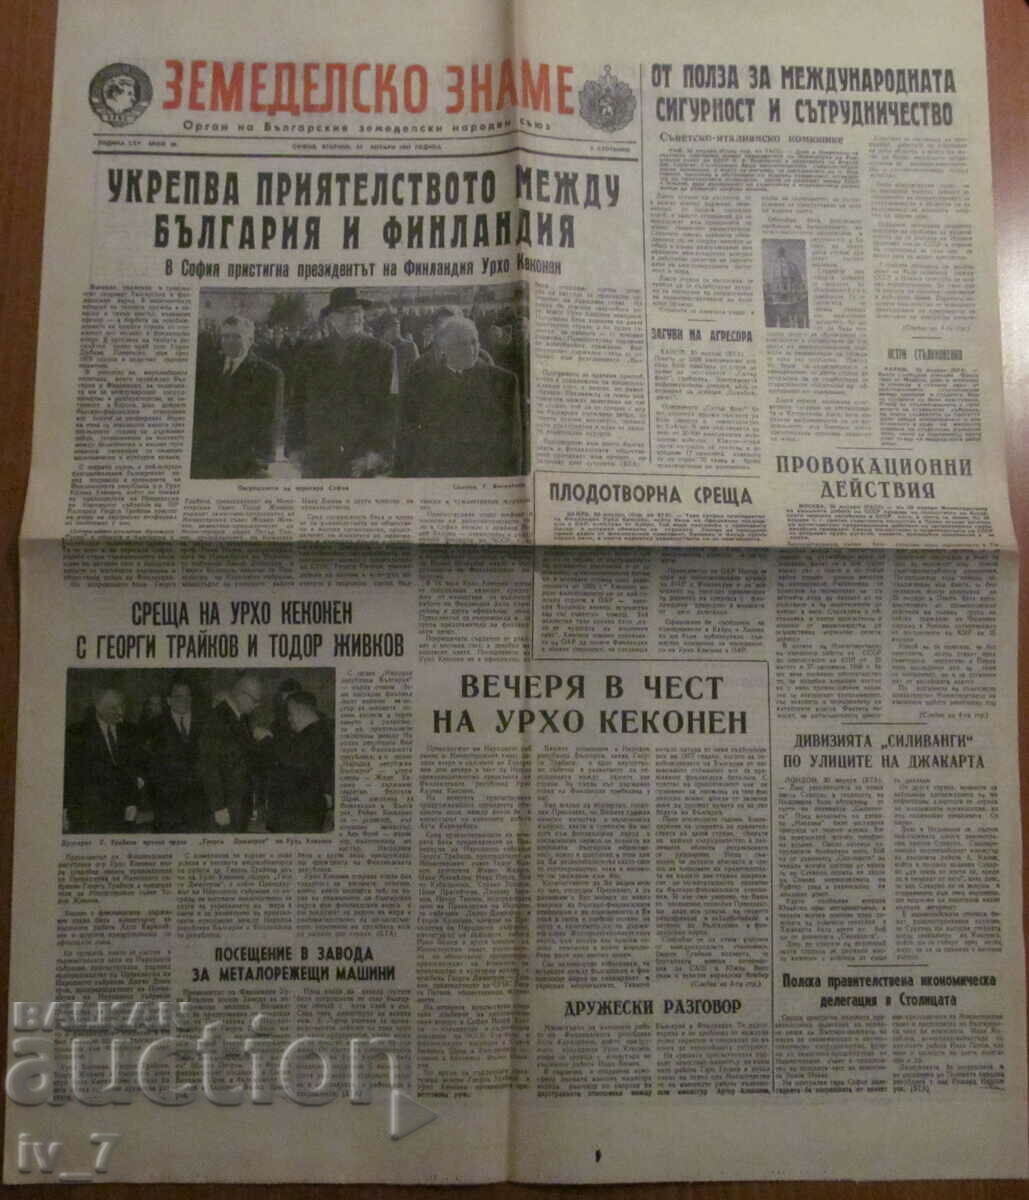 Newspaper "AGRICULTURAL FLAG" - January 31, 1967